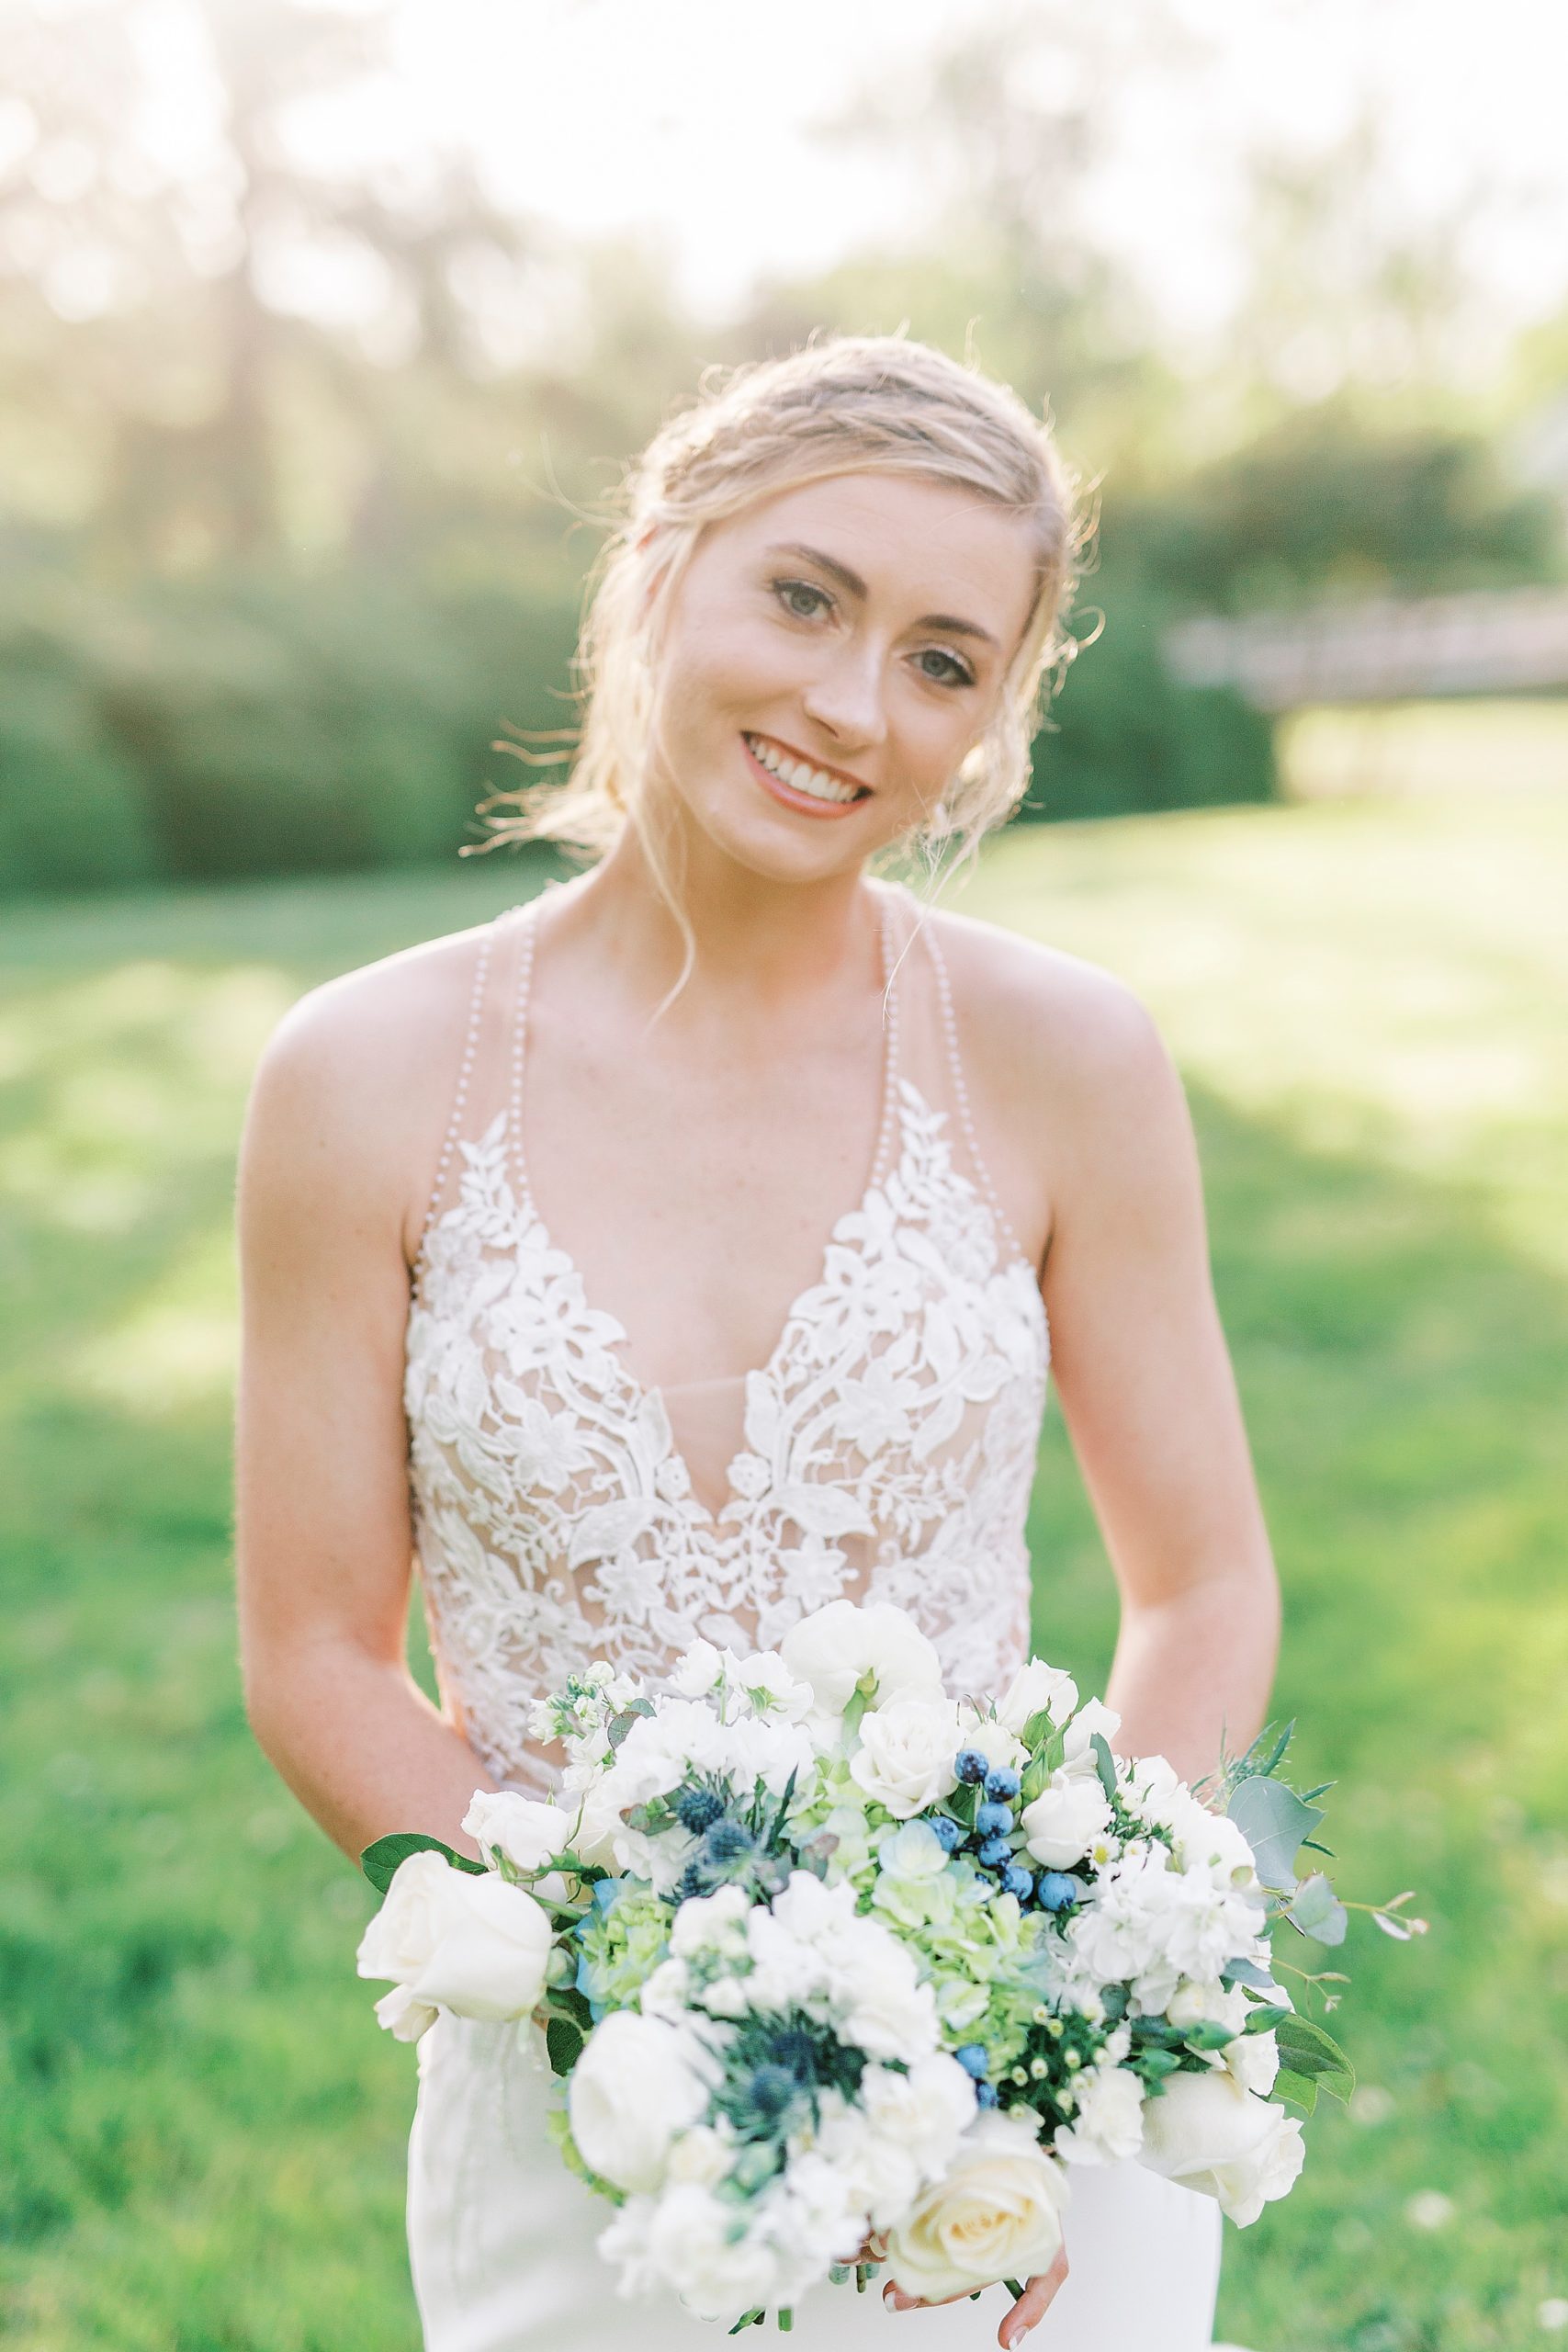 Tanglewood bridal portraits with bride in lace gown